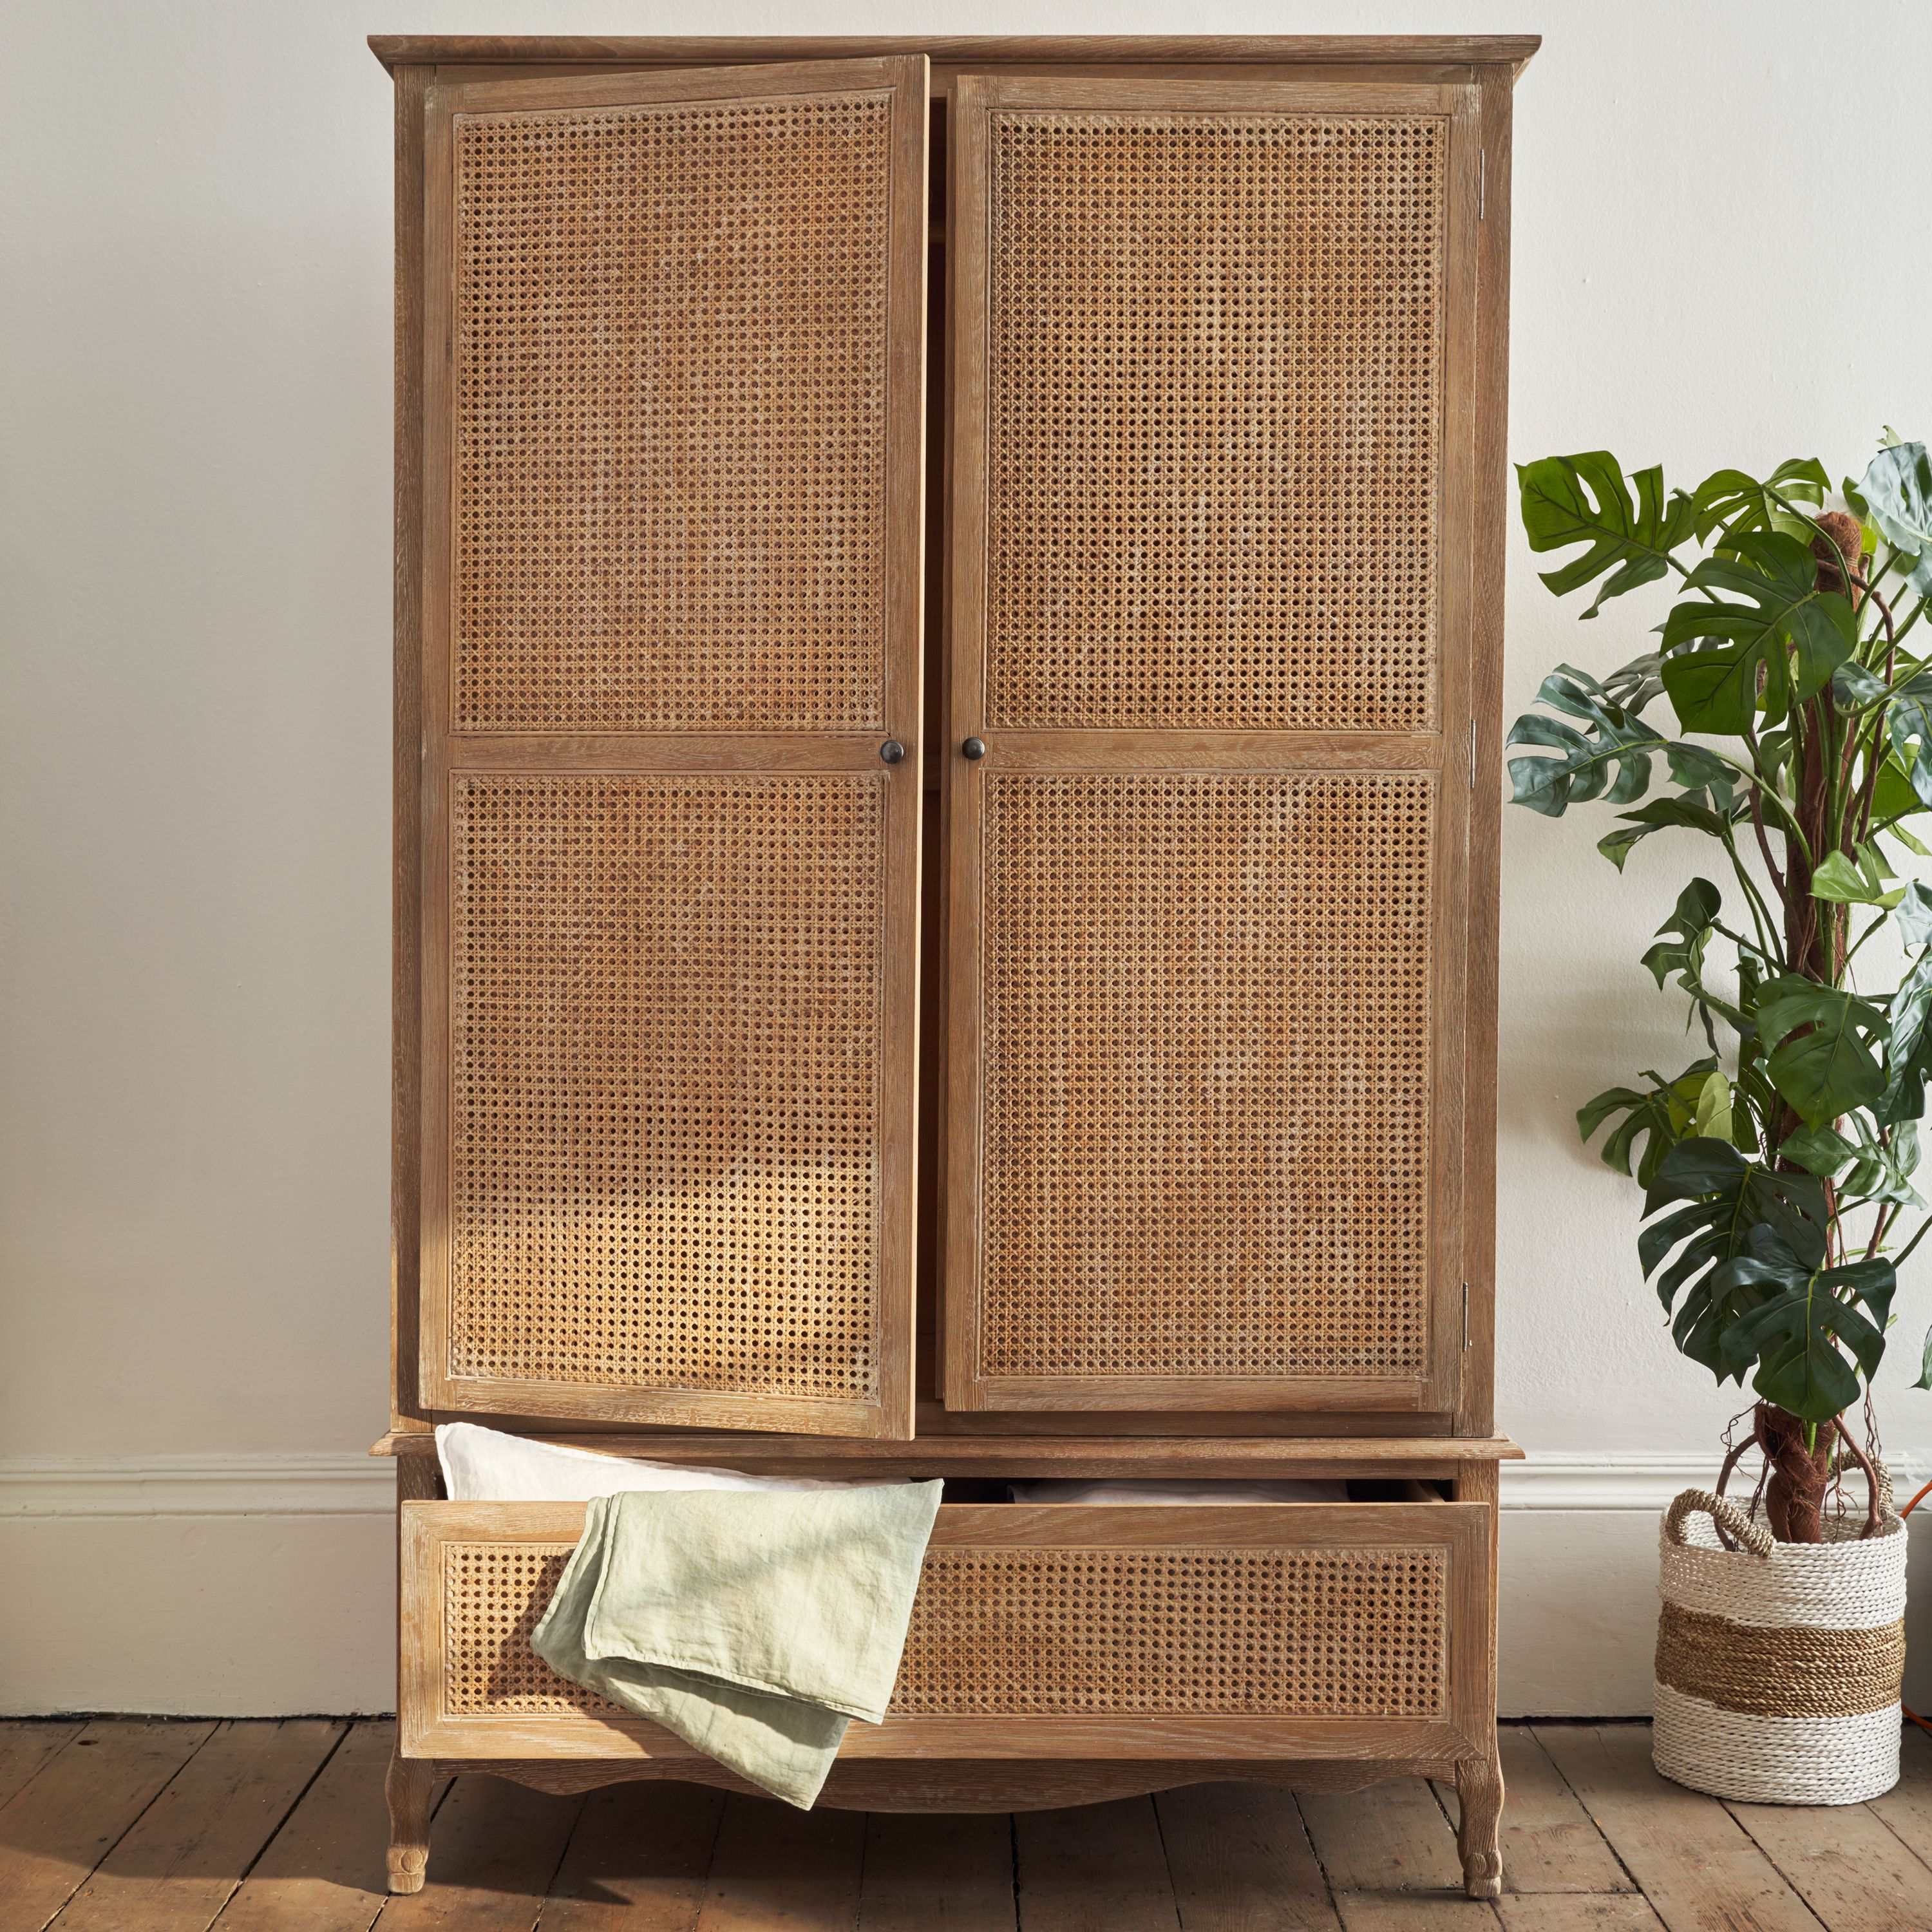 Sienna Rattan Wardrobe | Feather & Black Intended For Rattan Wardrobes (Gallery 15 of 20)